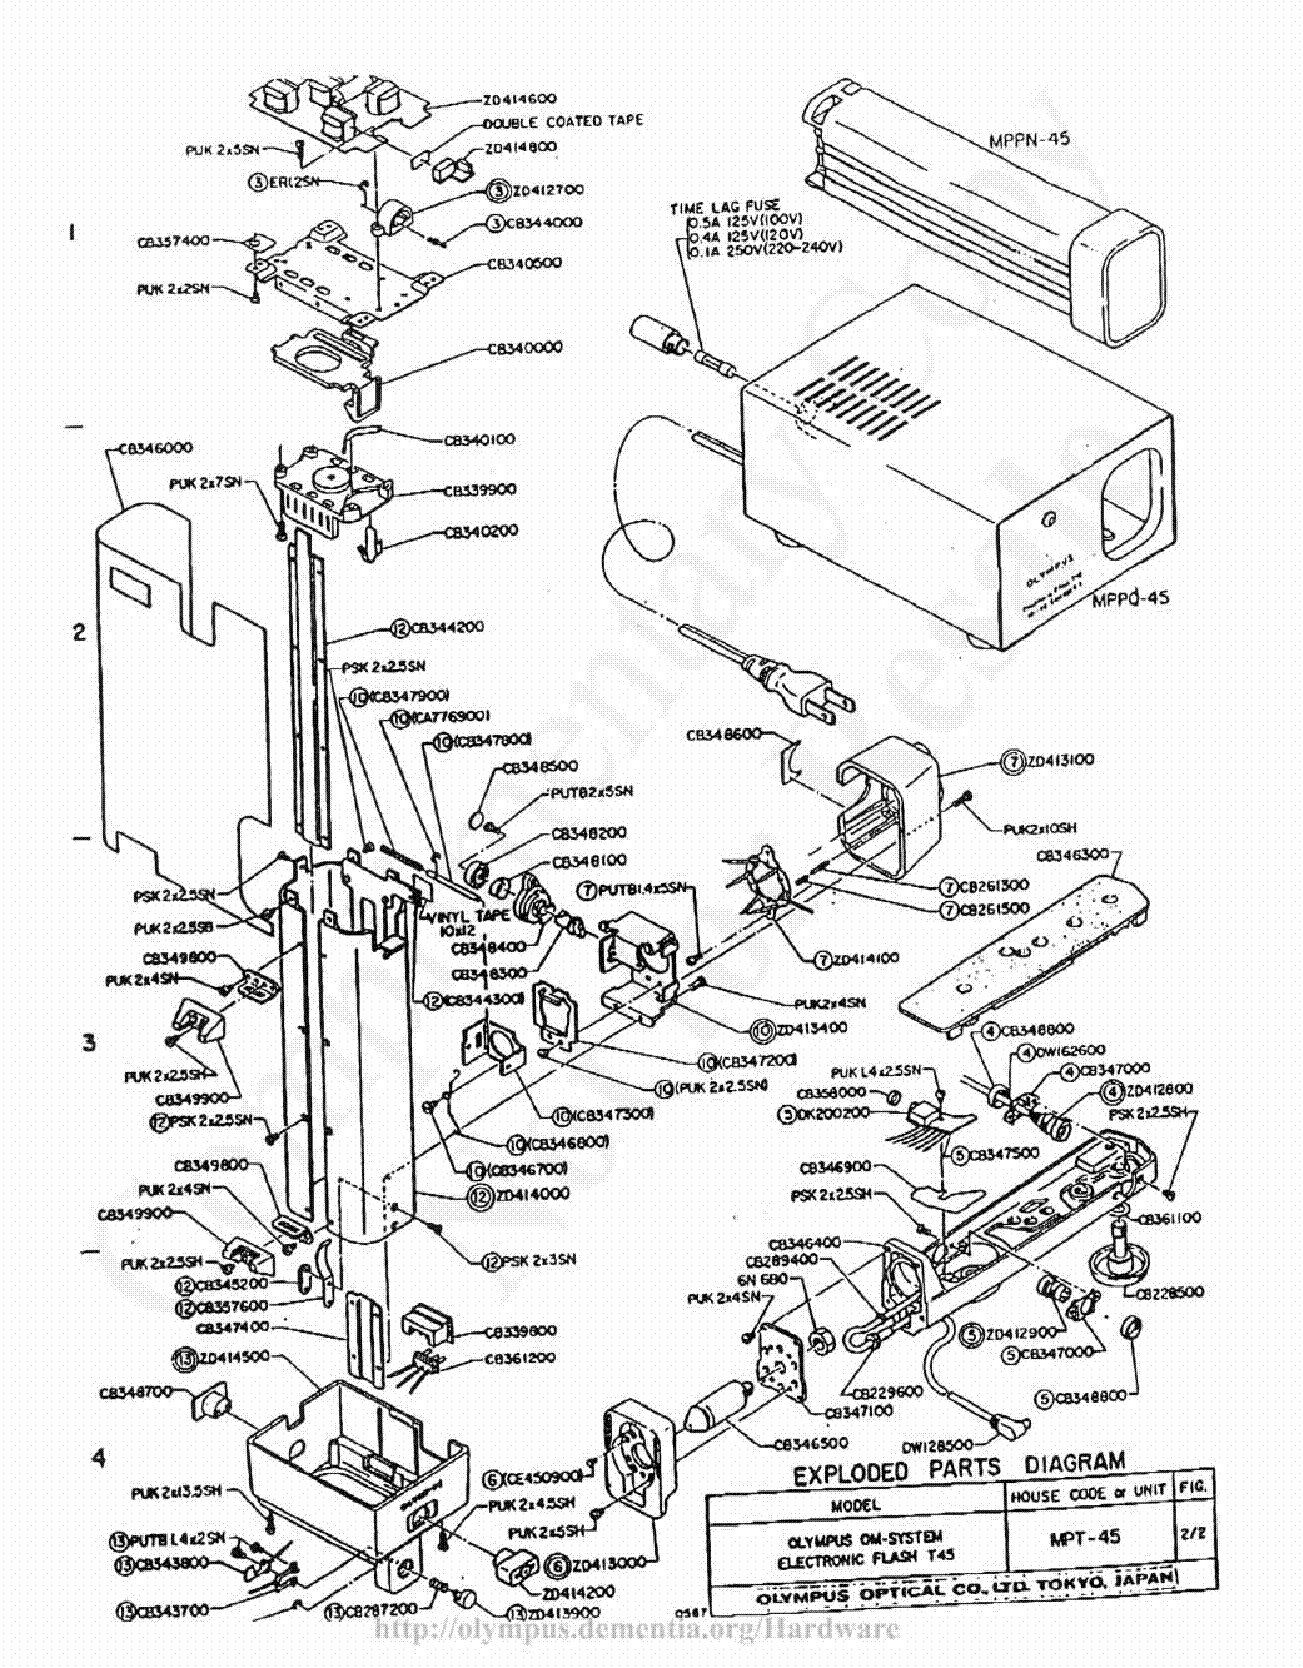 OLYMPUS T-45 EXPLODED PARTS DIAGRAM service manual (2nd page)